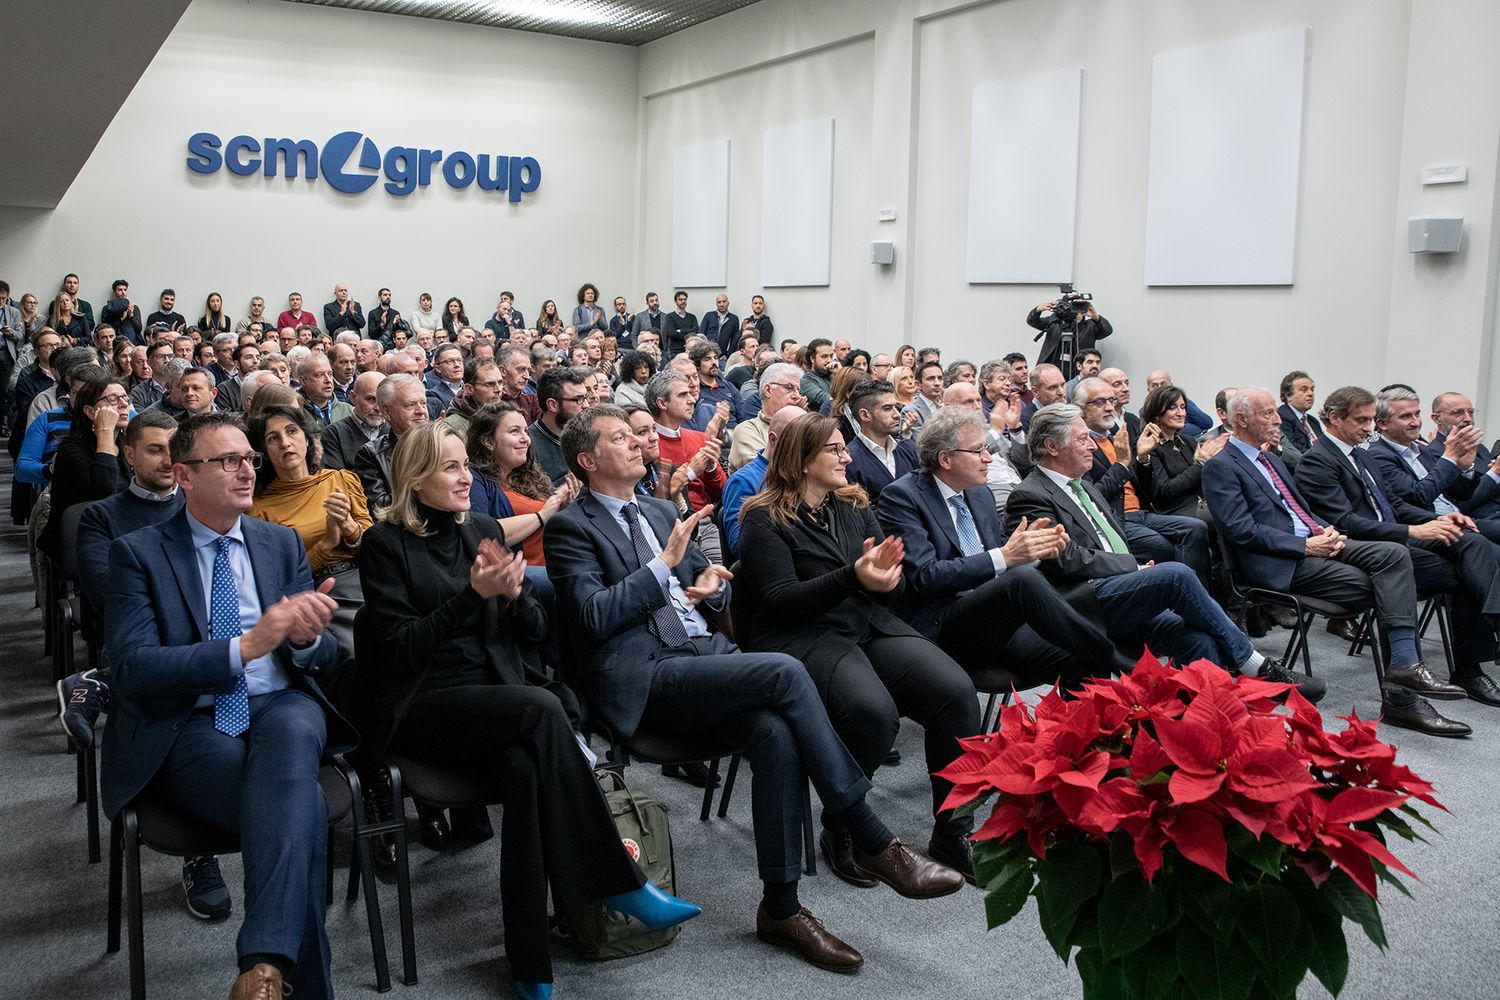 The year 2019 closes with a flourish celebrating the retiring employees and the winners of "Innovation" and "Improvement Ideas" awards